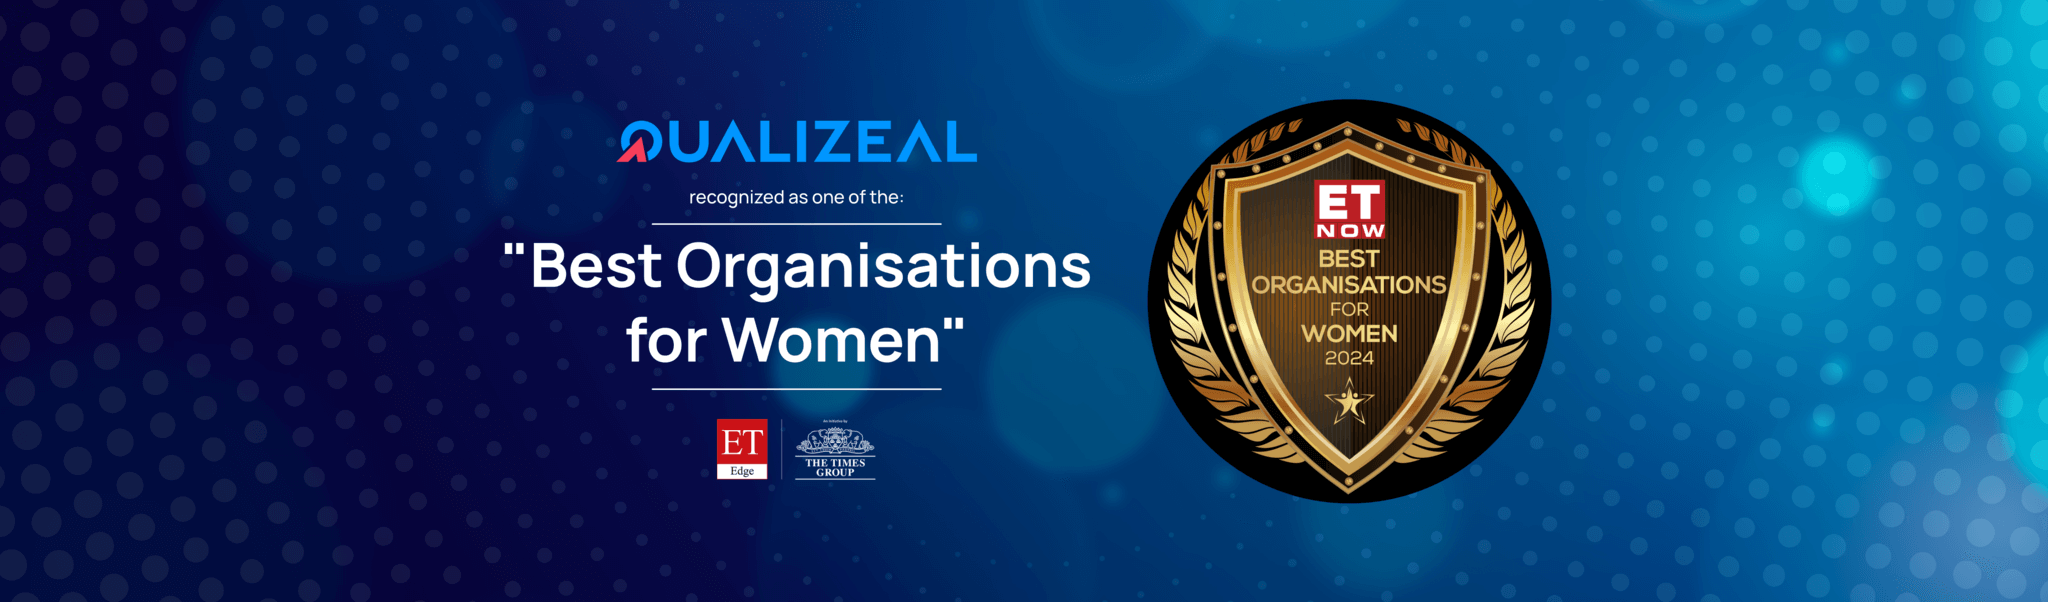 QualiZeal Awarded “Best Organisation for Women” by ET Edge.